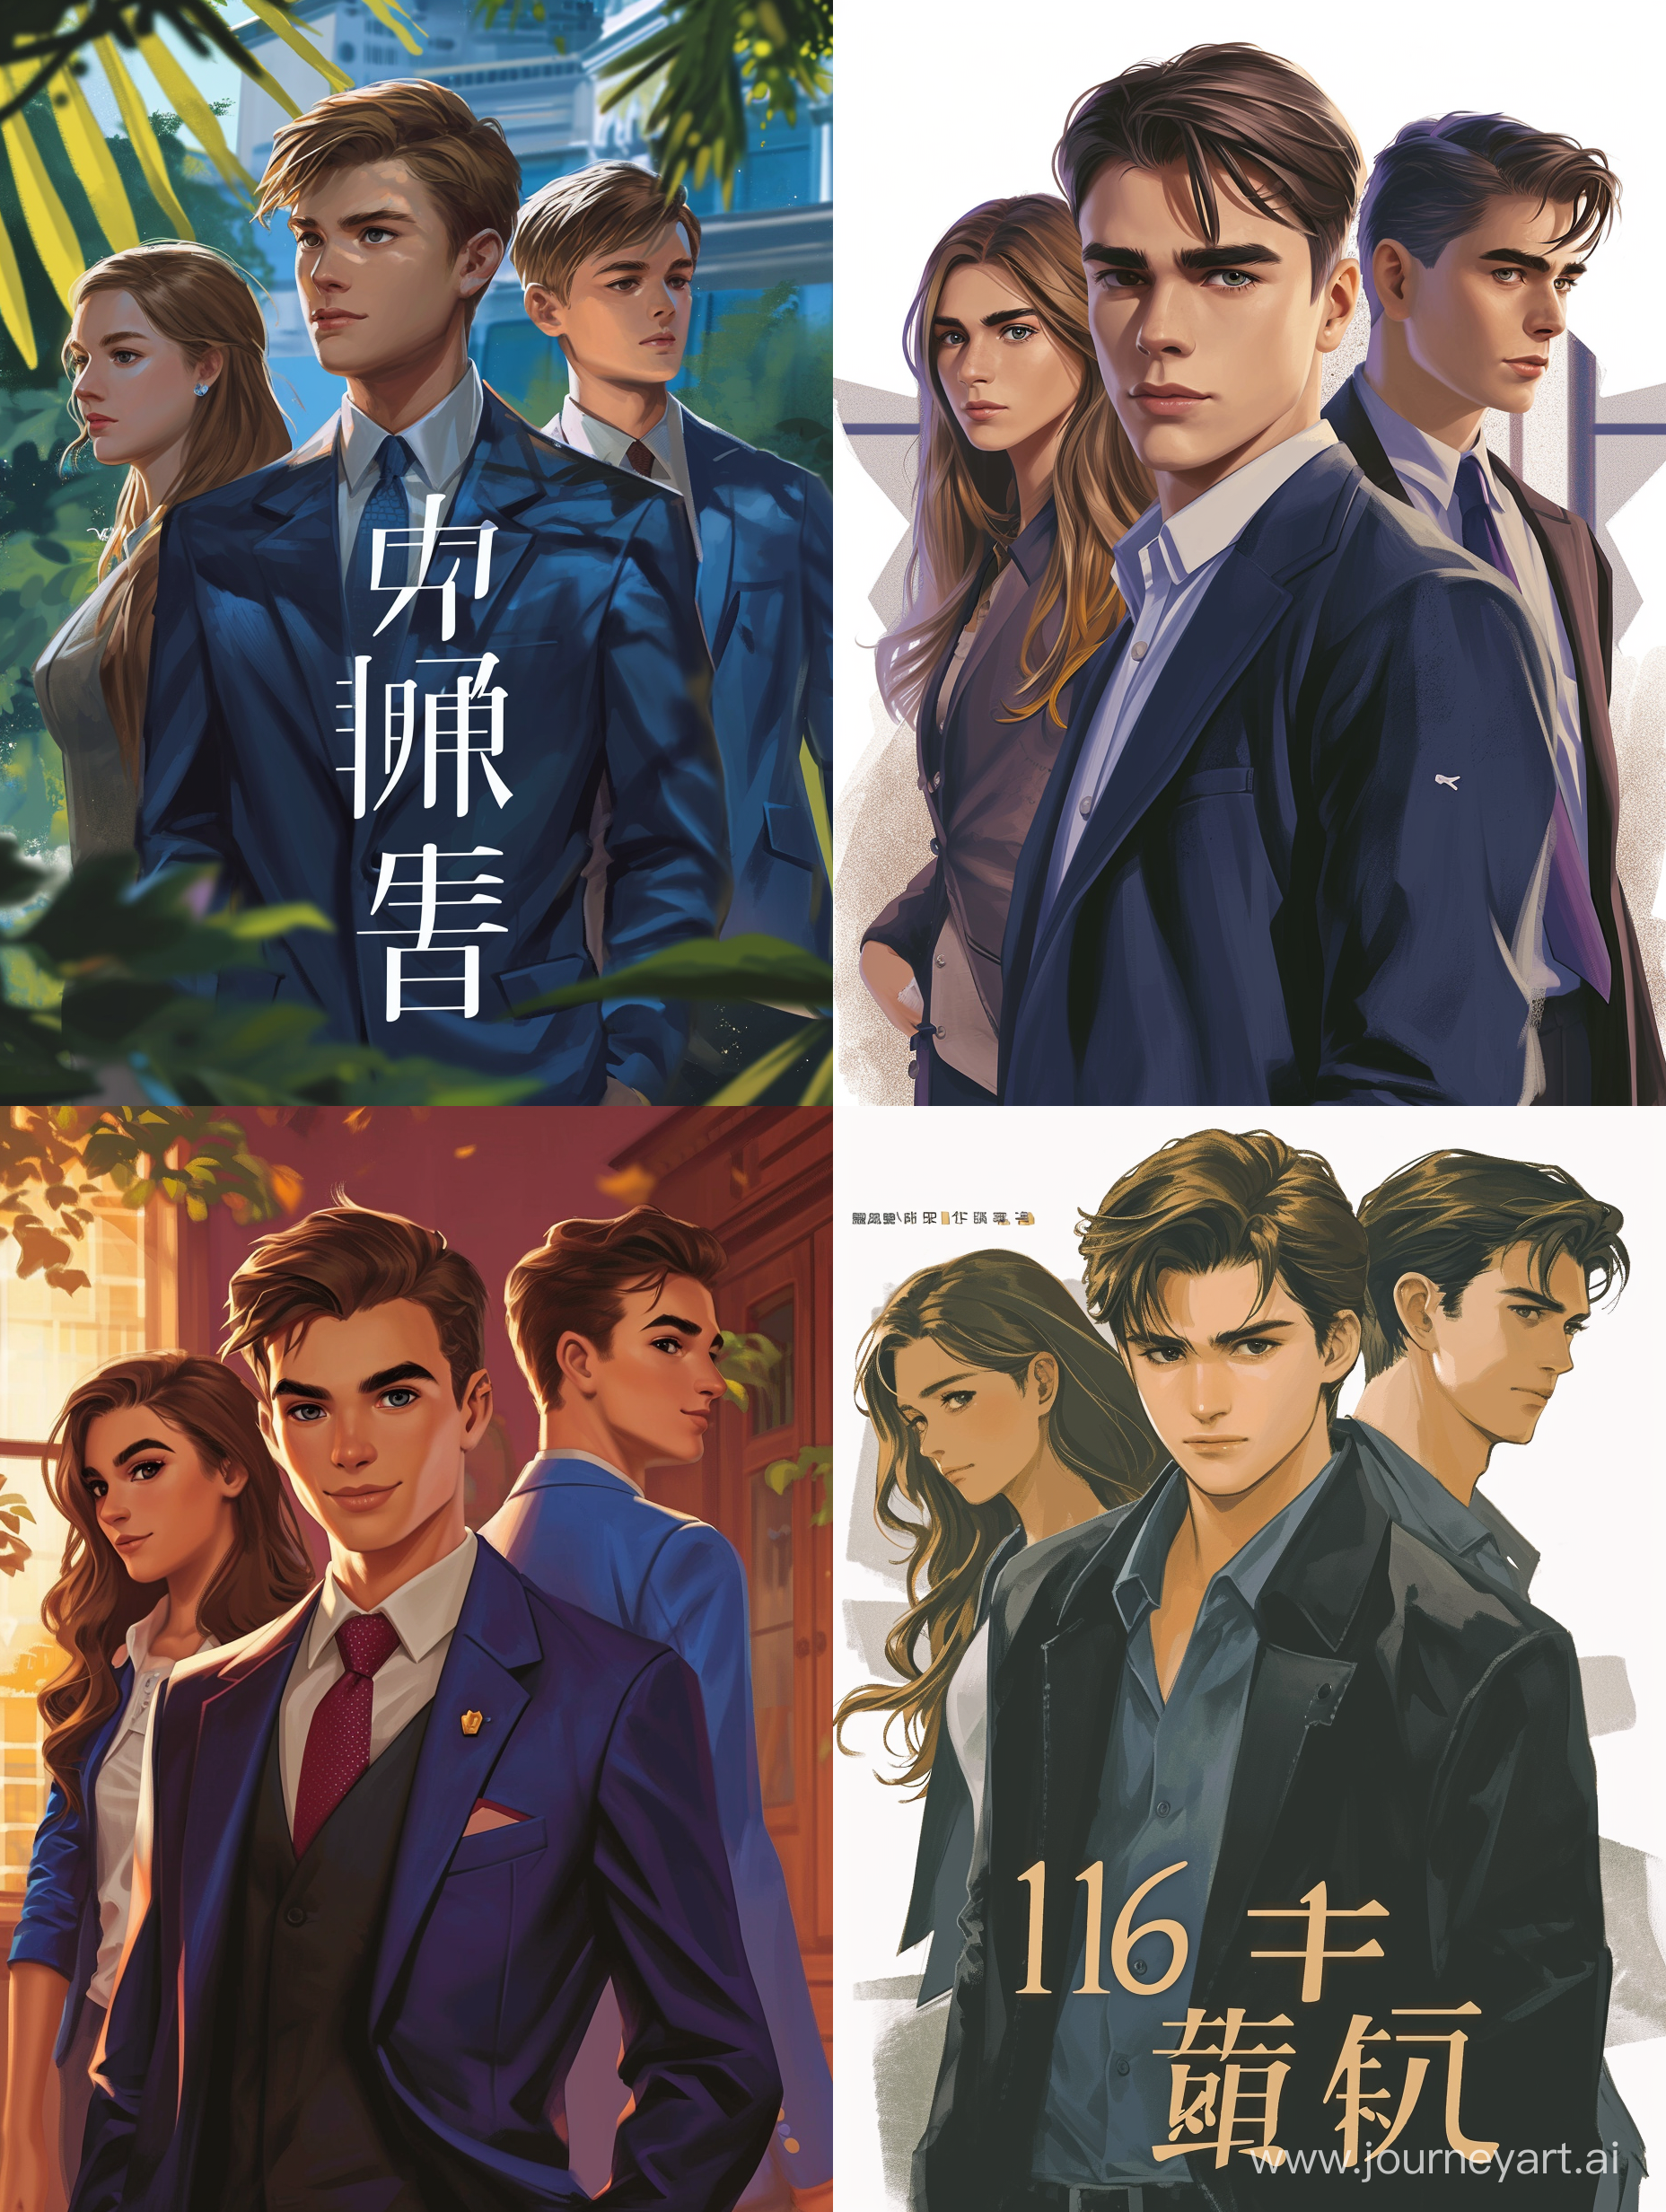 Create a cover for the book. There should be only three main characters in the picture. In the center is a smart, handsome, strict 16-year-old teenager. Behind his back or next to him is the hero's cheerful, silly younger brother and his girlfriend, a beautiful smart girl. The figures and faces of the characters should be as real as possible, as in the photo. The main character's clothing style is strict, his brother's is teenage.